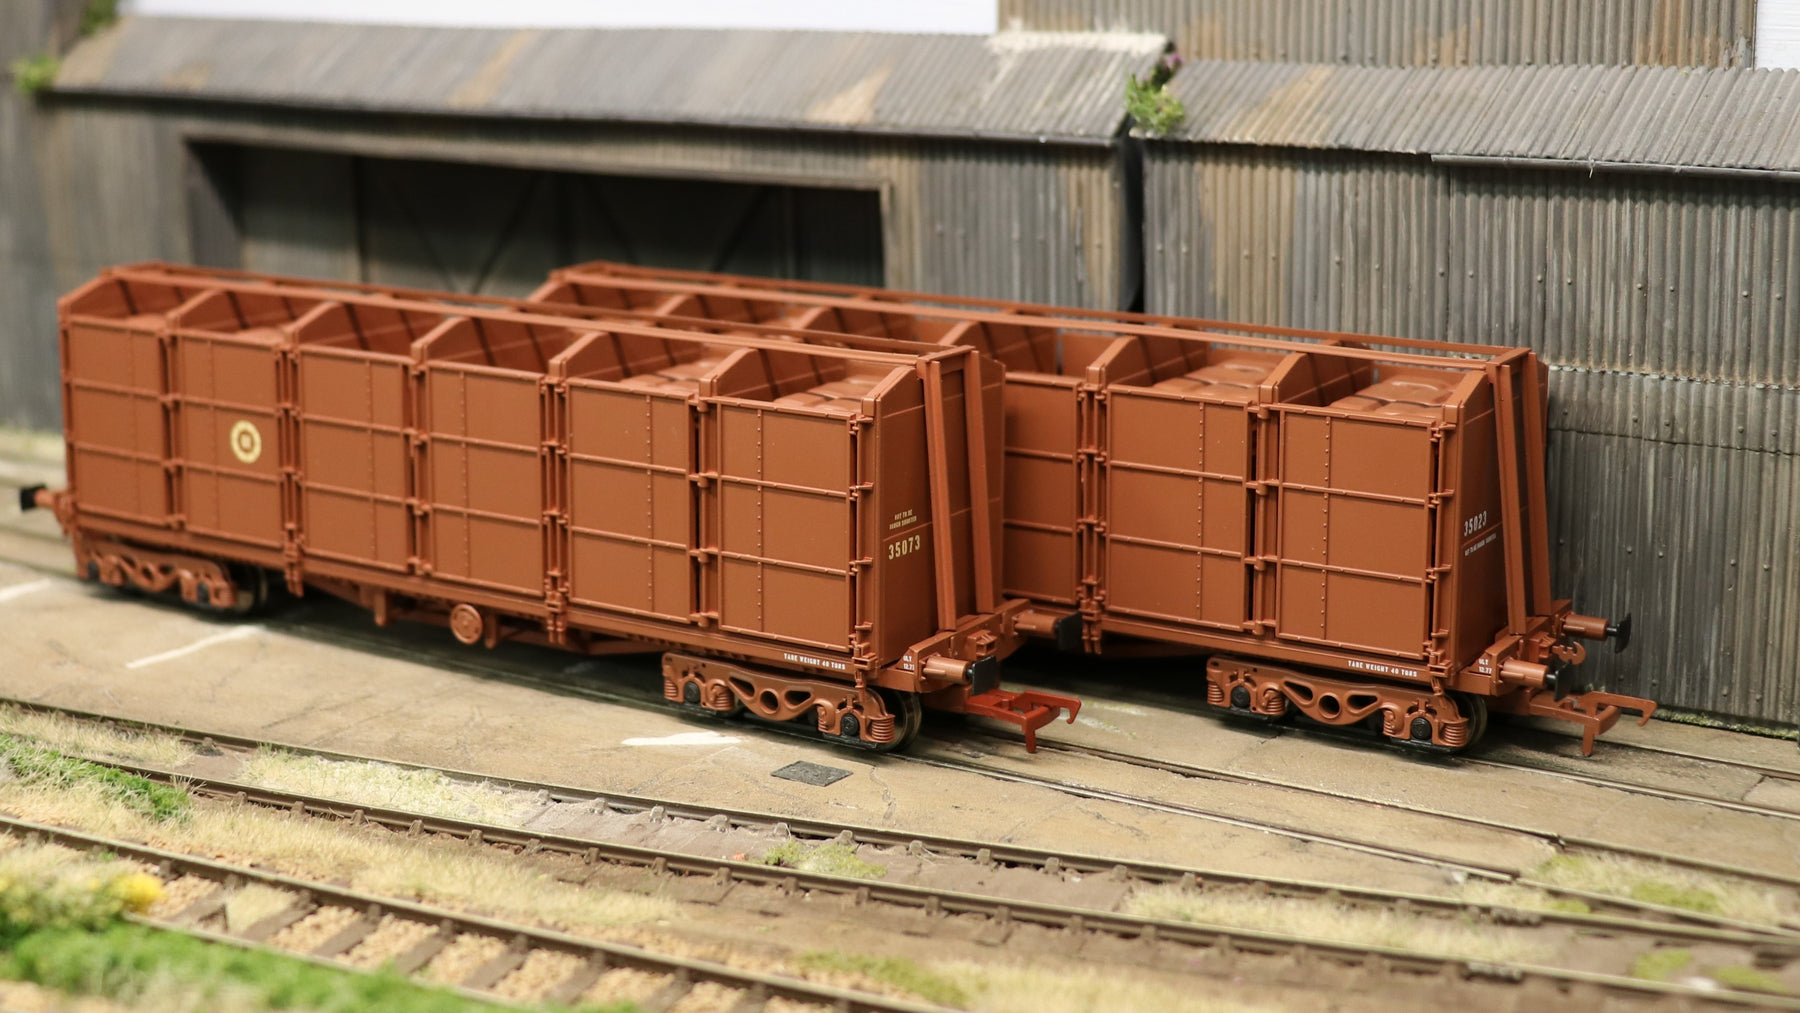 Fert Wagons Now Available to Order!